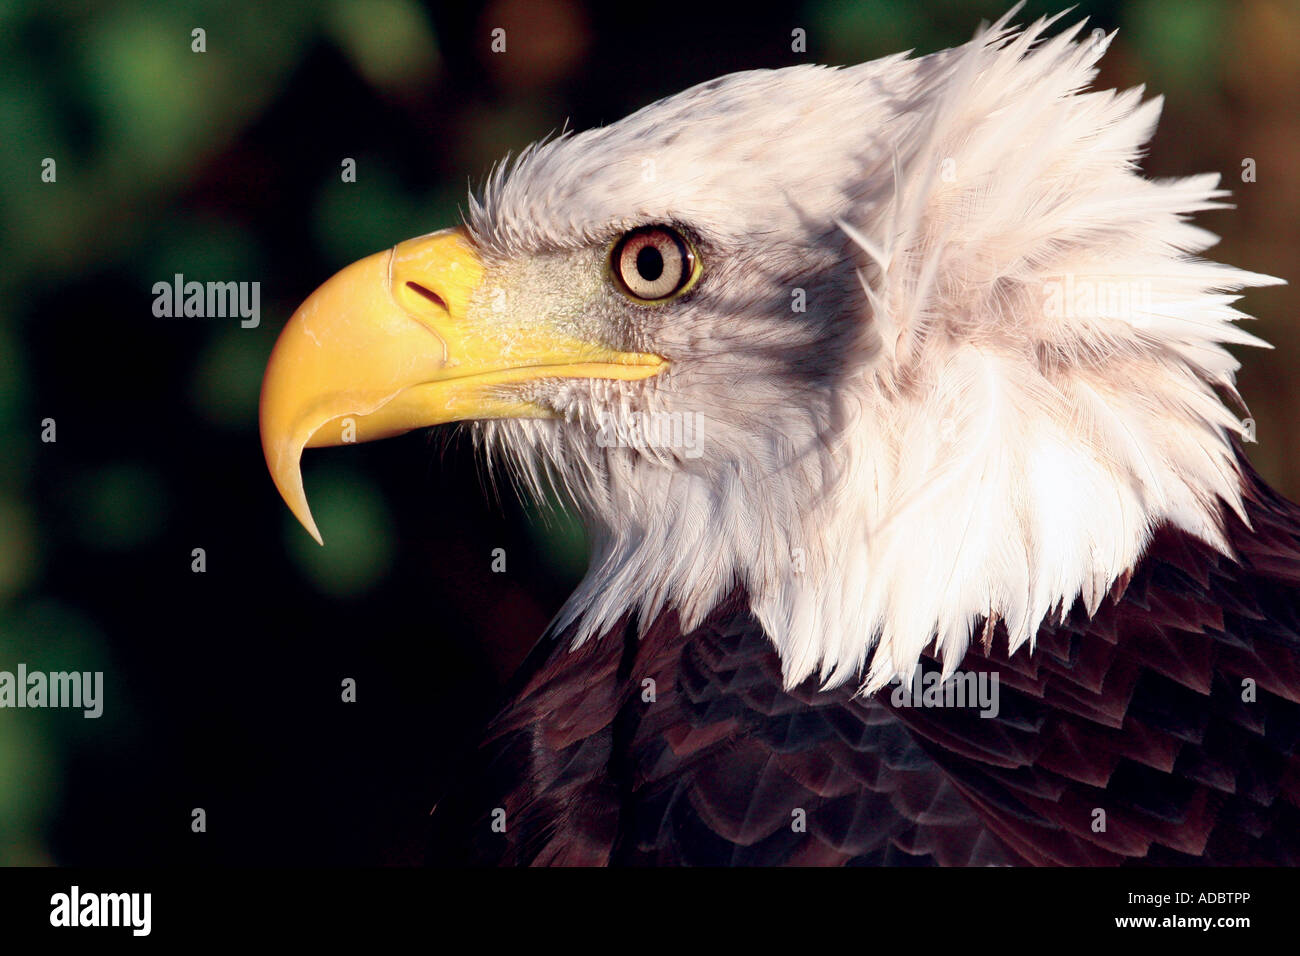 Bald eagle with wind in head feathers Stock Photo